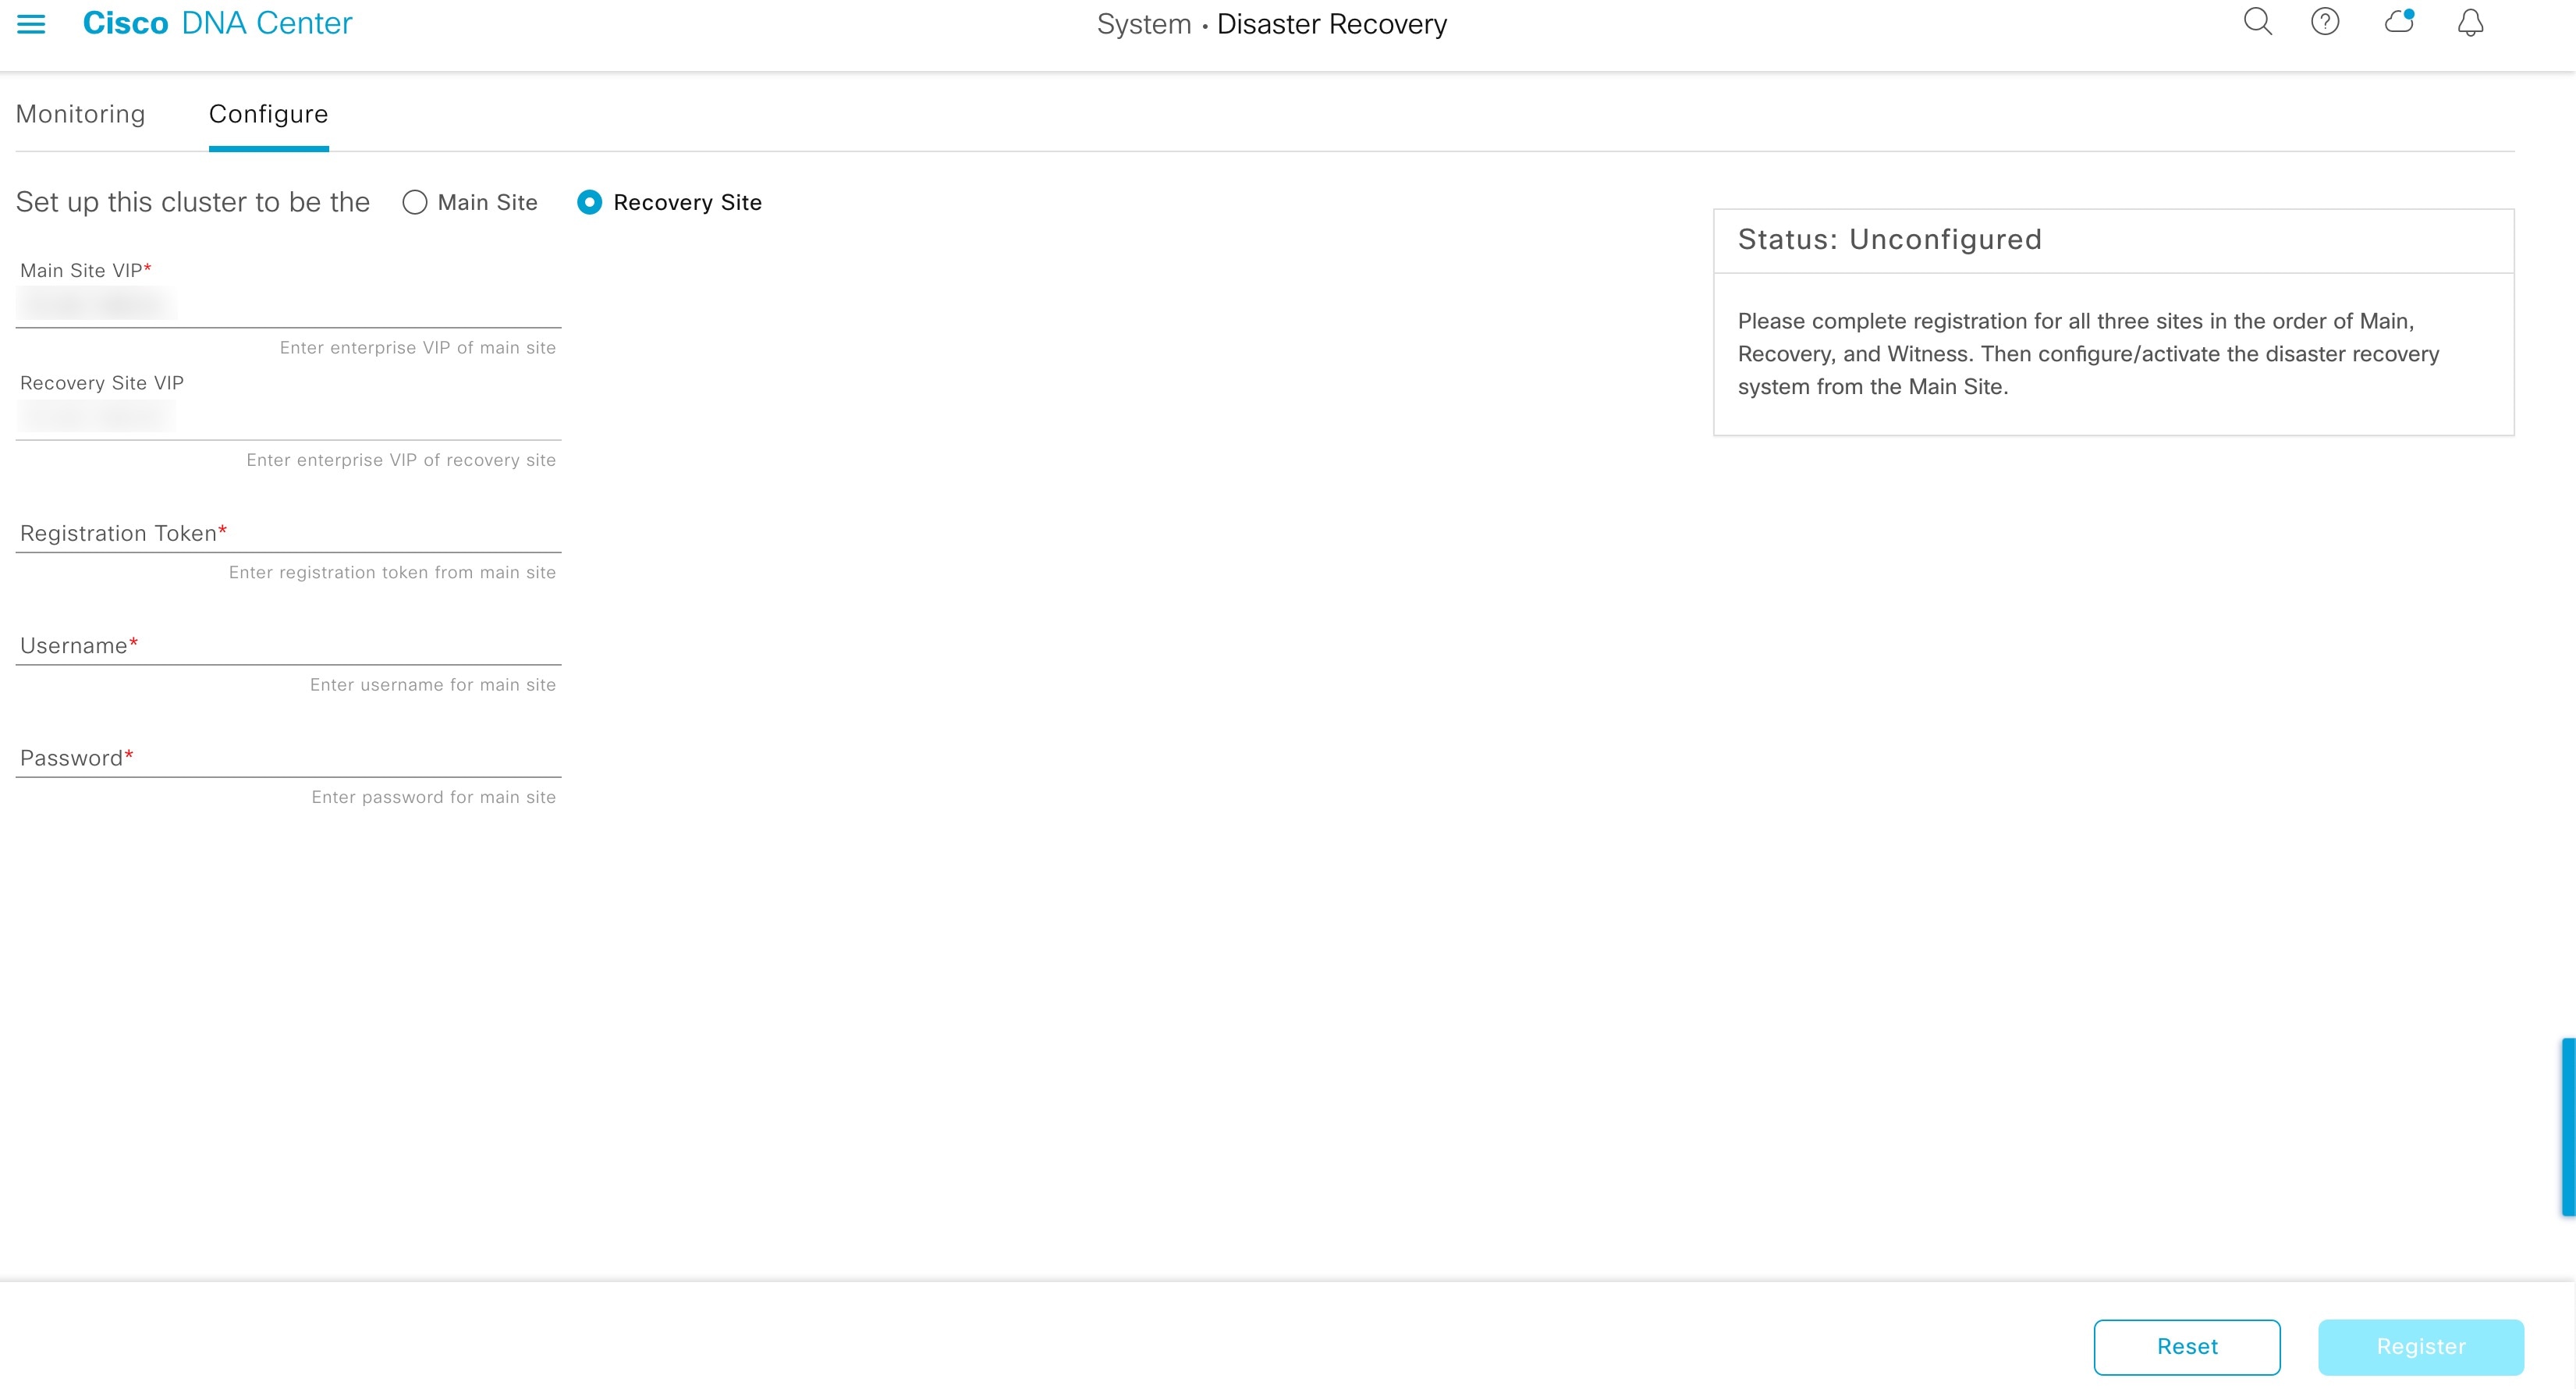 The Configure tab in the Cisco DNA Center Disaster Recovery window displays the Recovery Site radio button selected.